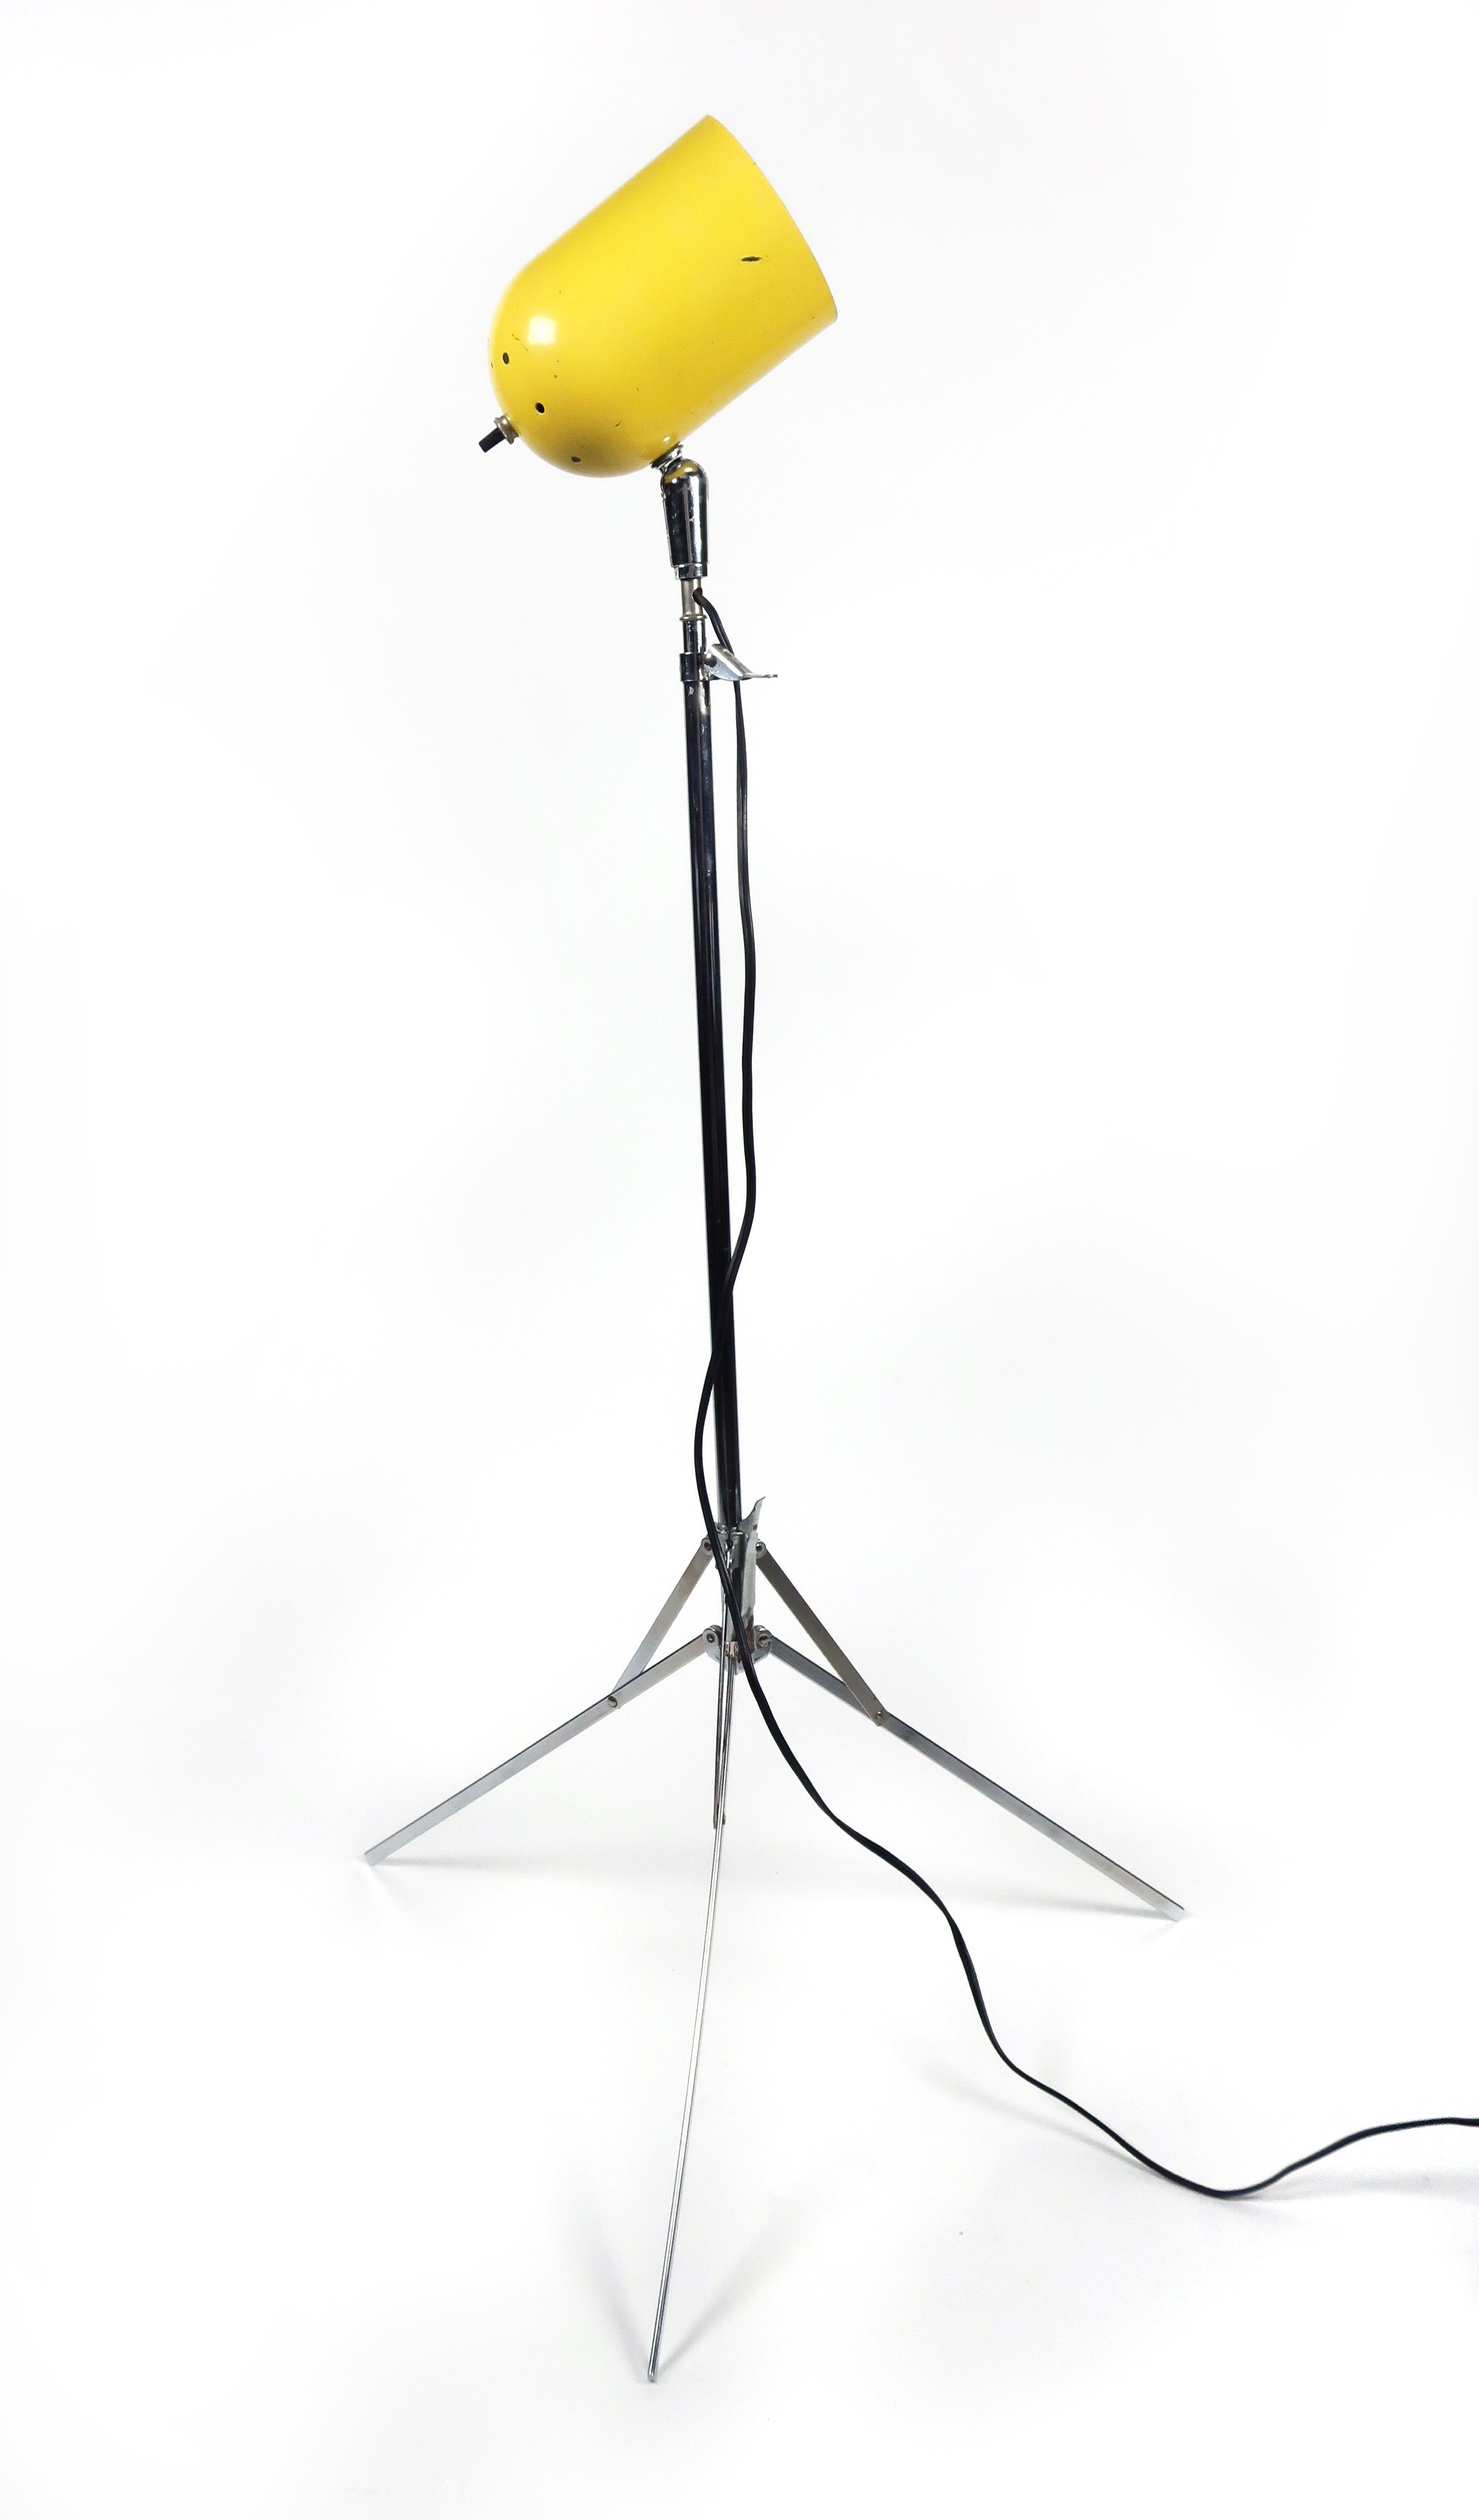 A vintage adjustable tripod base floor lamp with chrome base and stem and yellow metal shade. Height adjusts from 41” to 57” tall and base can be folded up for easy transportation. Works great as a reading or task lamp or for accent lighting. 

In